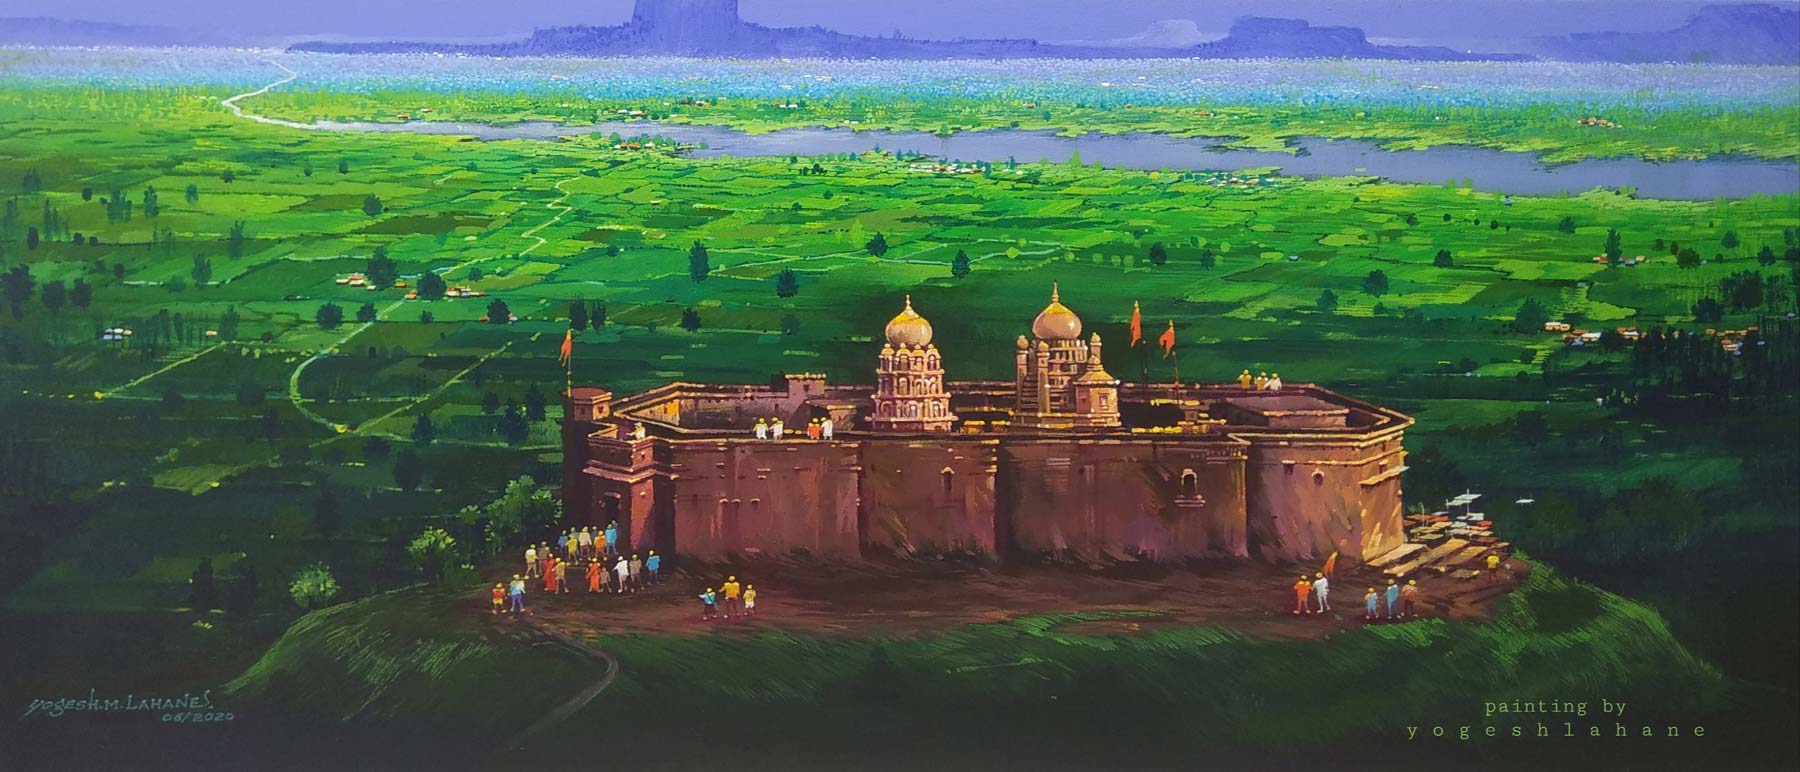 Realism Painting with Acrylic on Canvas "Jejuri Temple" art by Yogesh Lahane